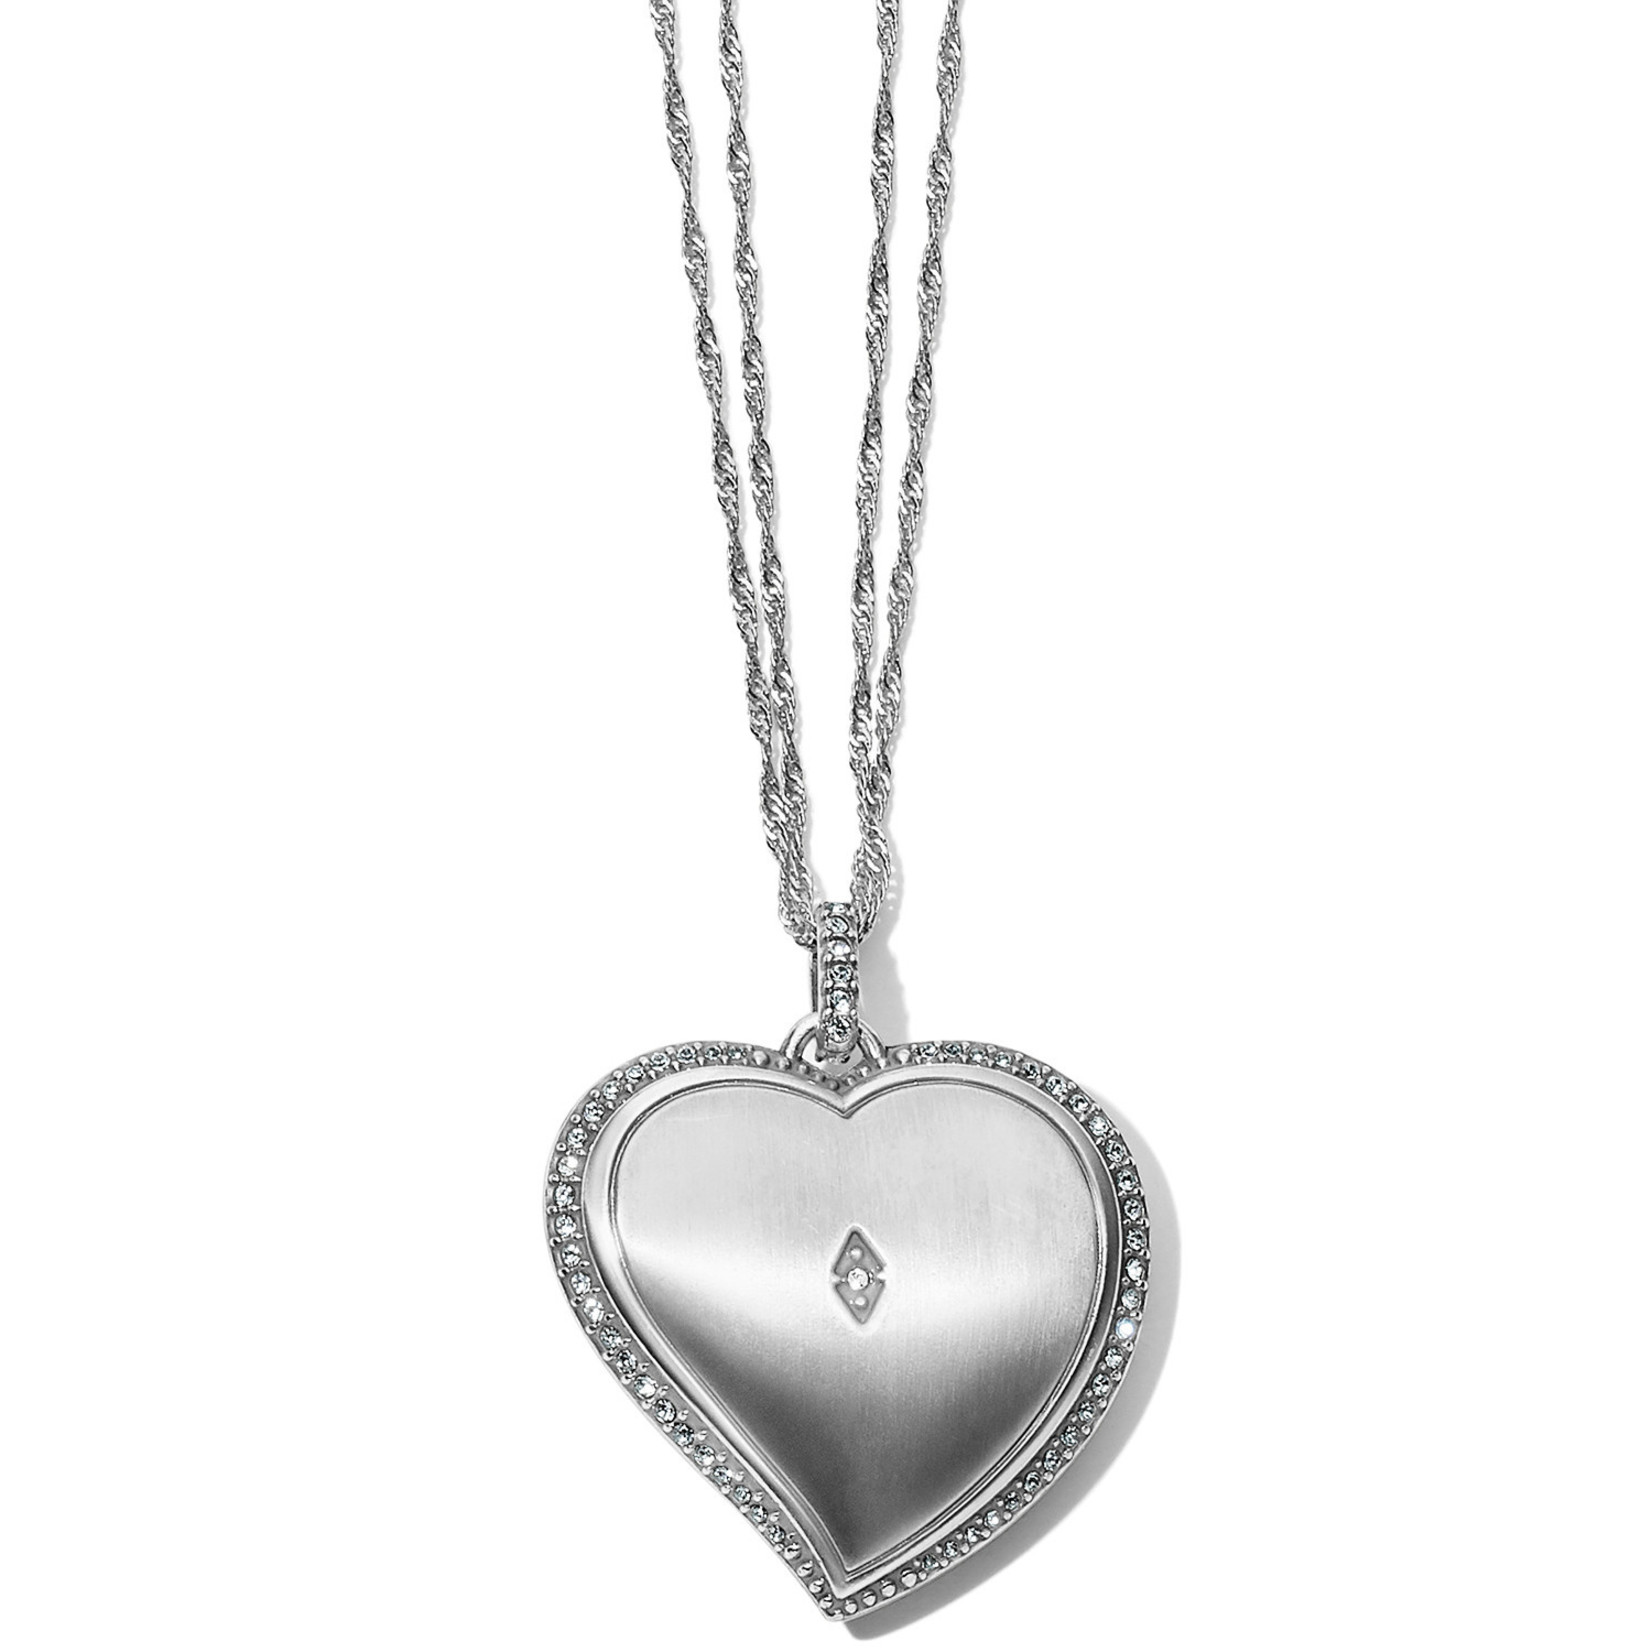 Brighton Trust Your Journey Convertible Reversible Large Heart Necklace